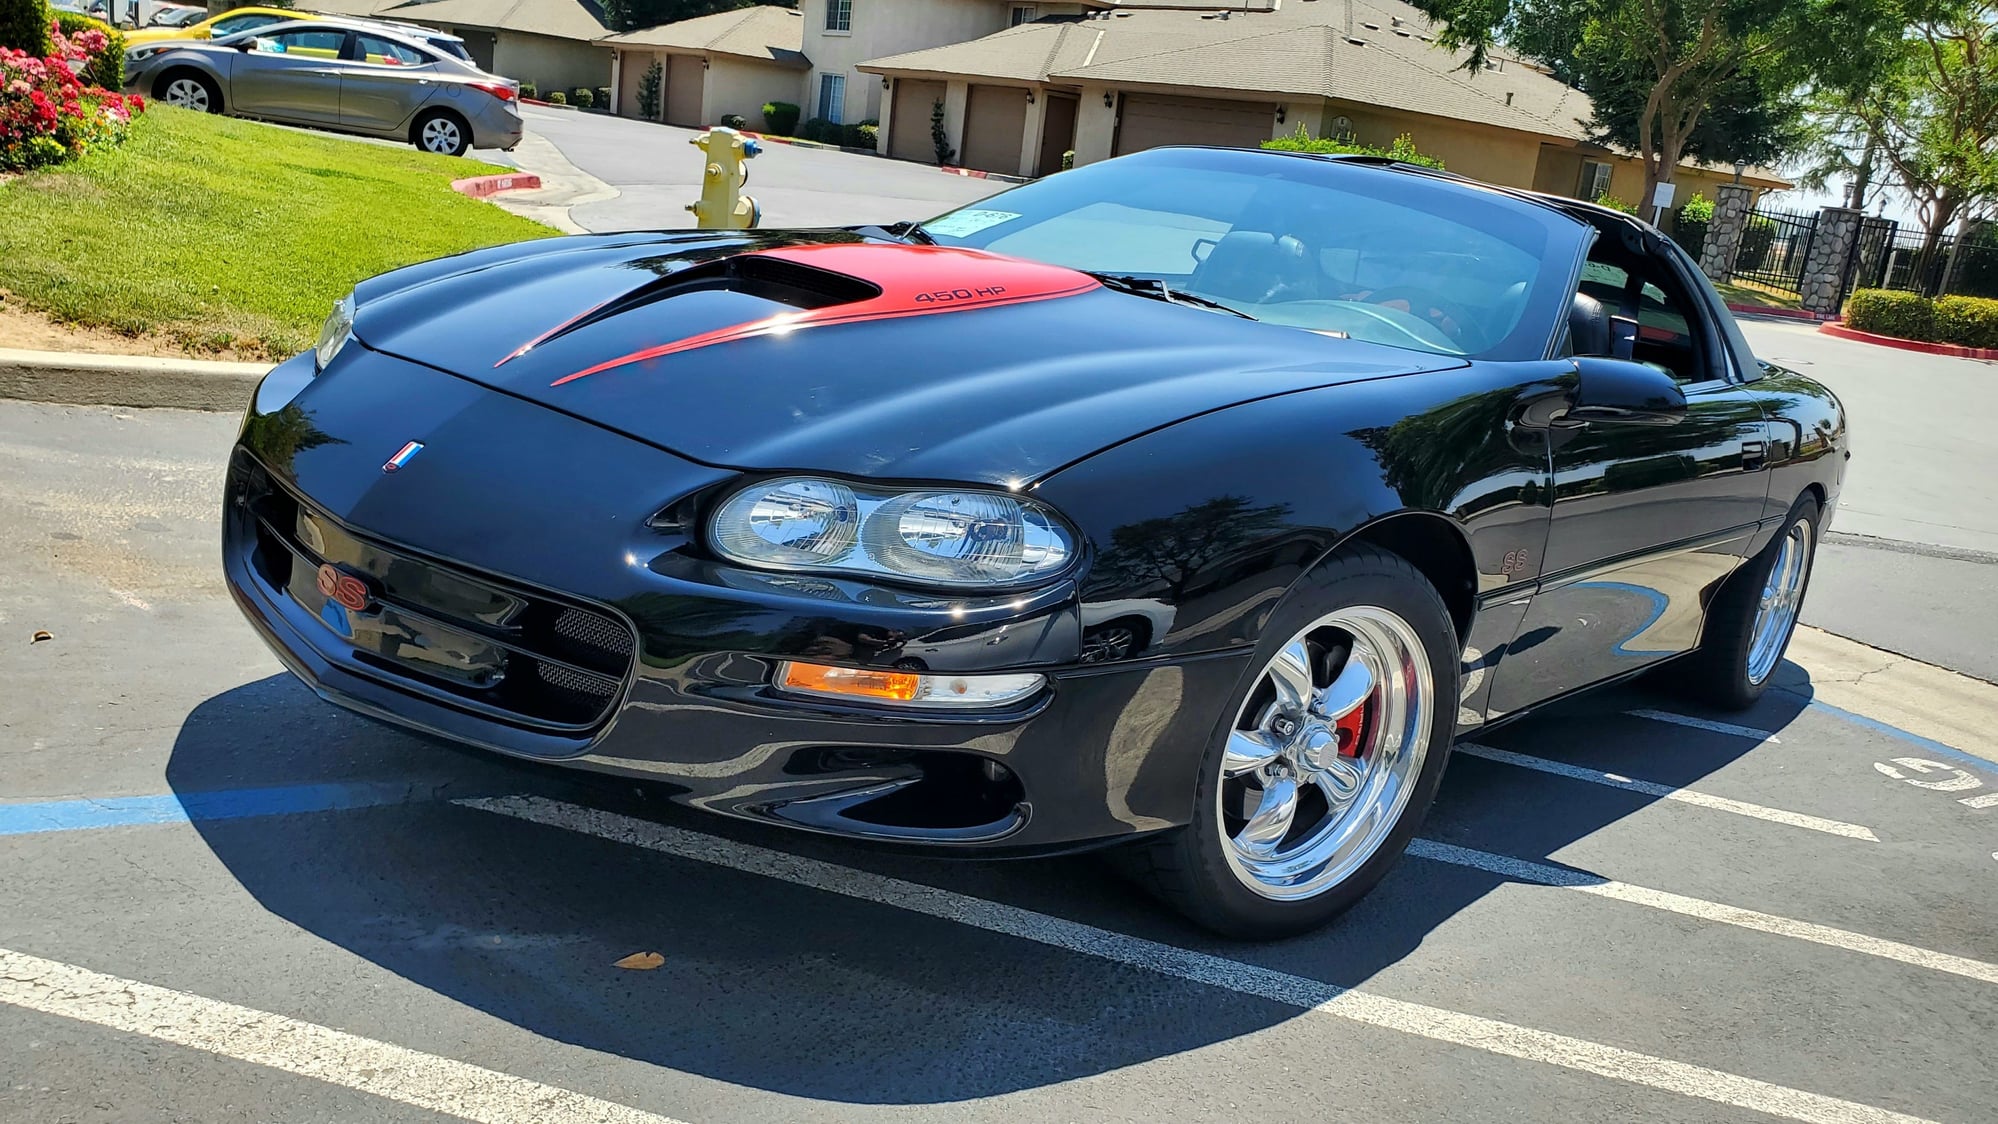 2001 Chevrolet Camaro - 2001, 6 Speed, 36k miles, 461RWHP - Used - VIN 2g1fp22g612138338 - 35,800 Miles - 8 cyl - 2WD - Manual - Coupe - Black - Fresno, CA 93611, United States